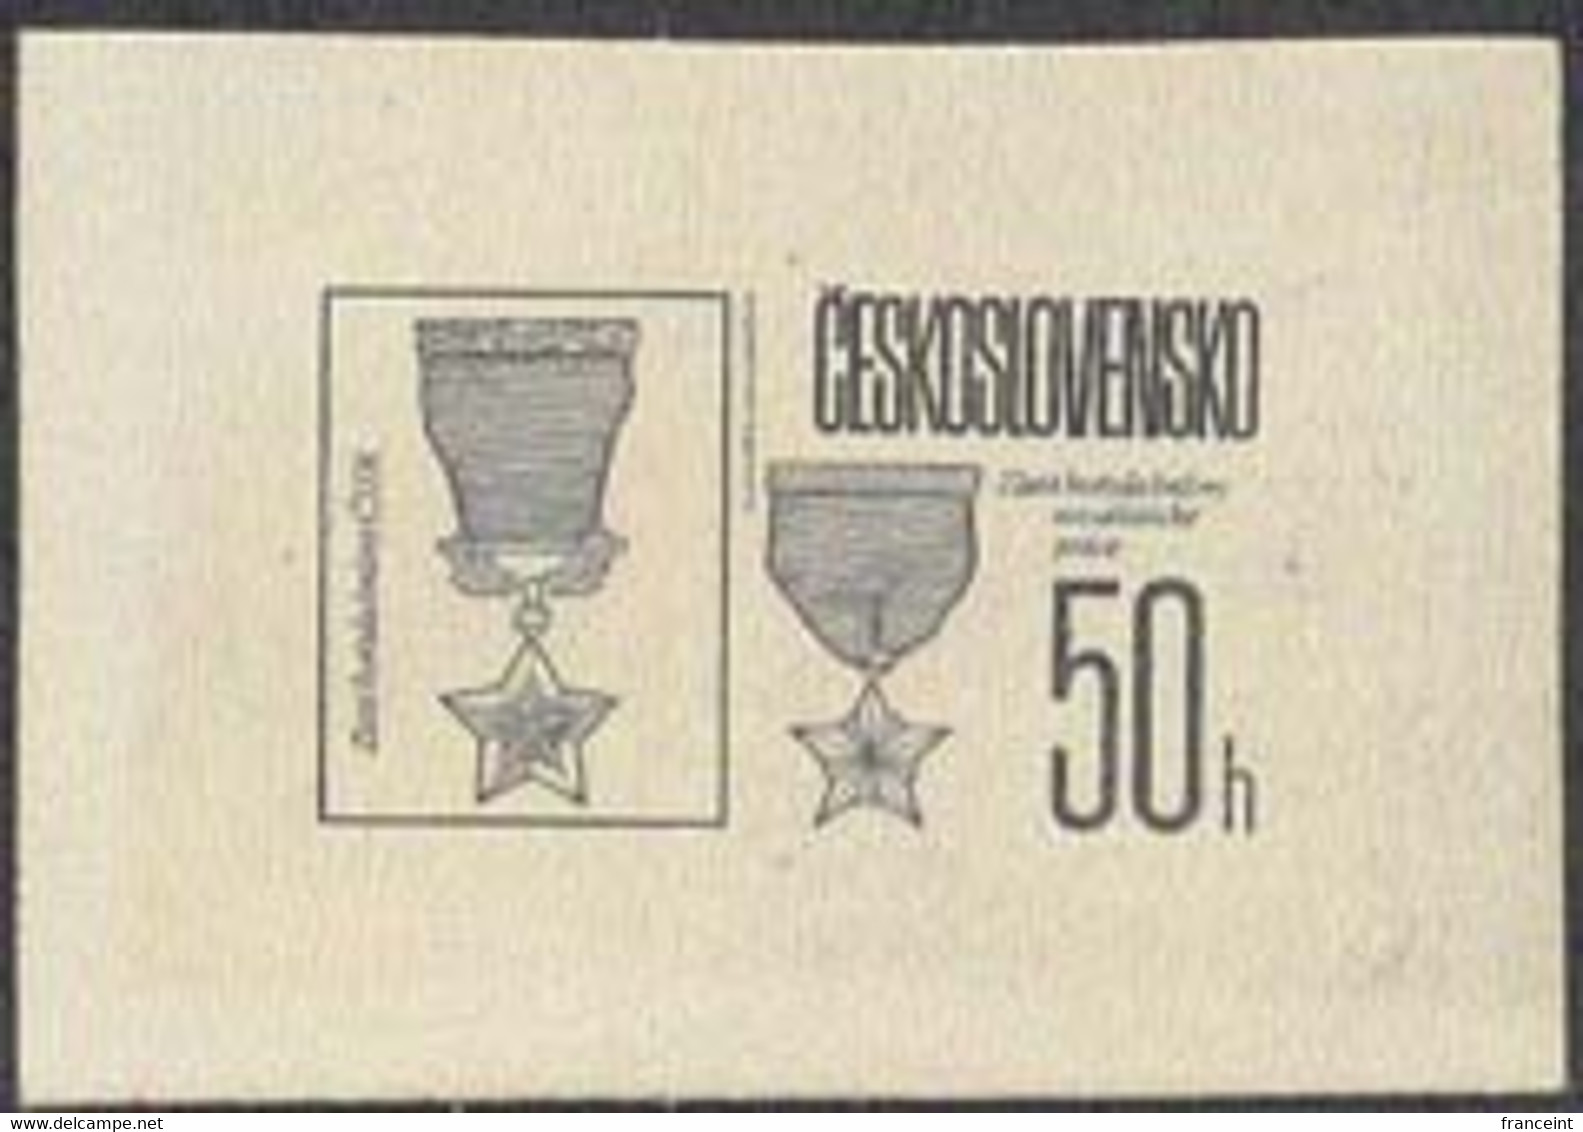 CZECHOSLOVAKIA (1987) Gold Stars Of Socialist Labor. Die Proof In Black. State Decorations. Scott No 2642 - Proofs & Reprints